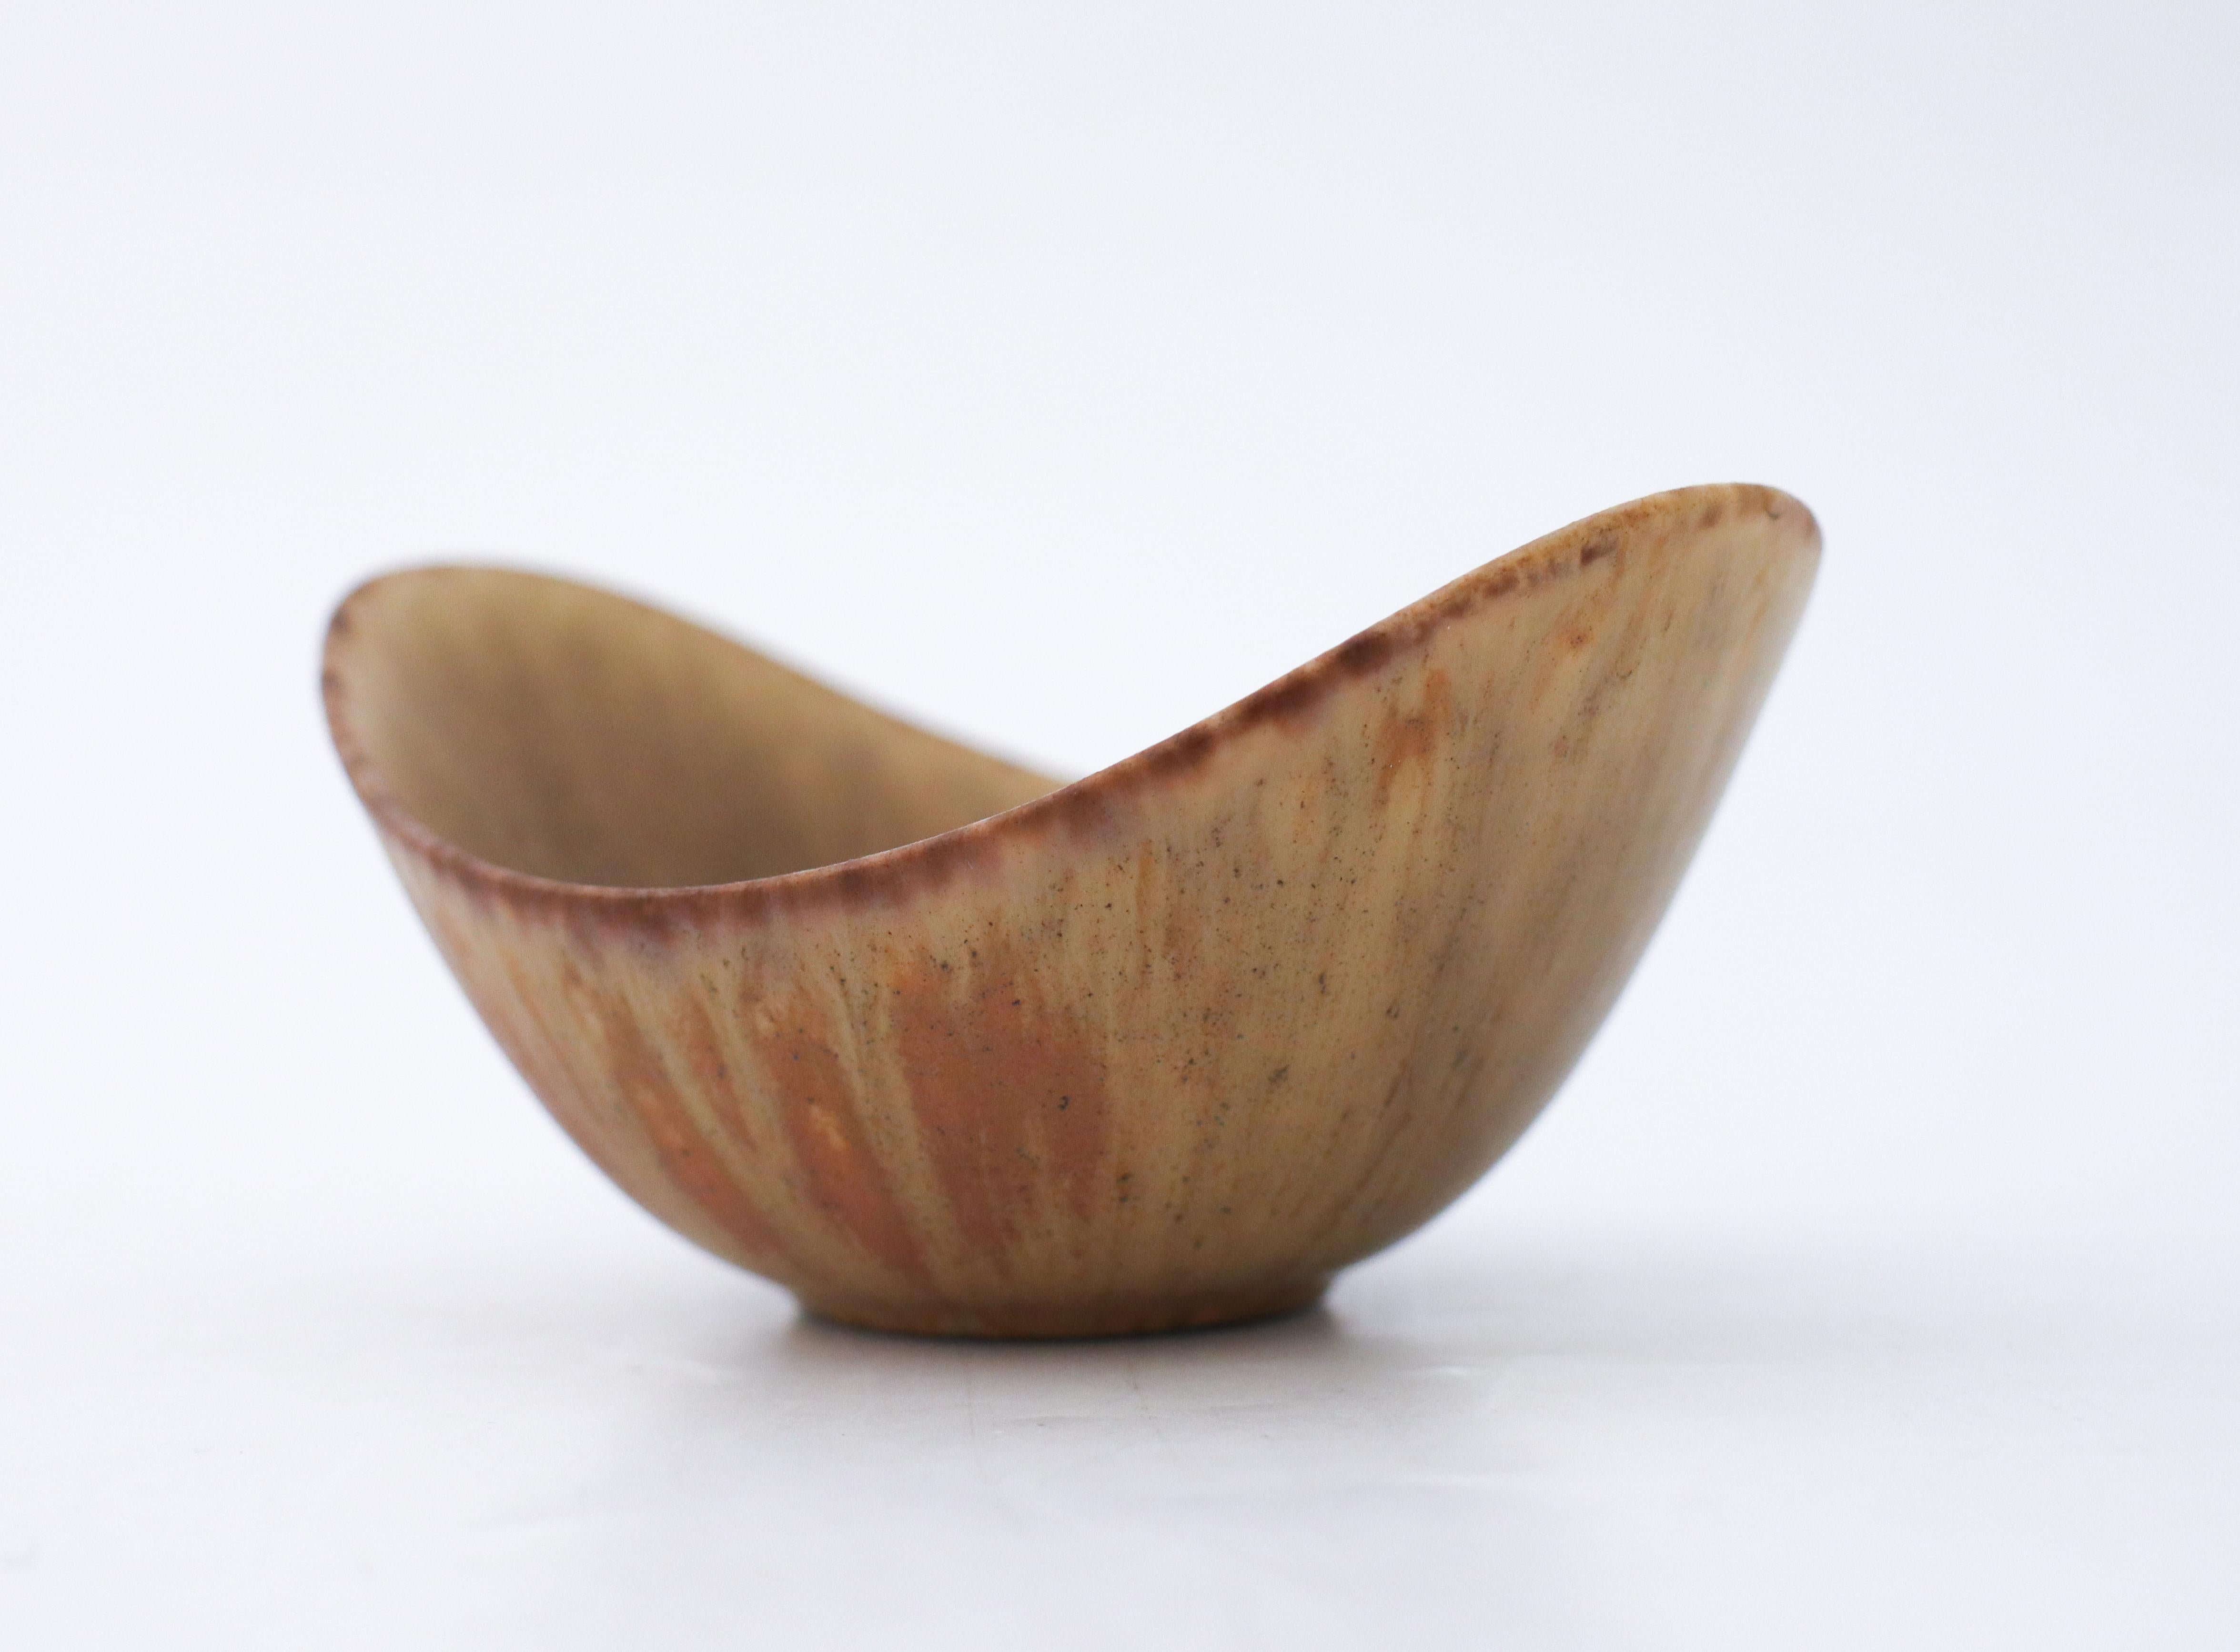 A brown bowl designed by Gunnar Nylund at Rörstrand, the bowl is 5 cm (2